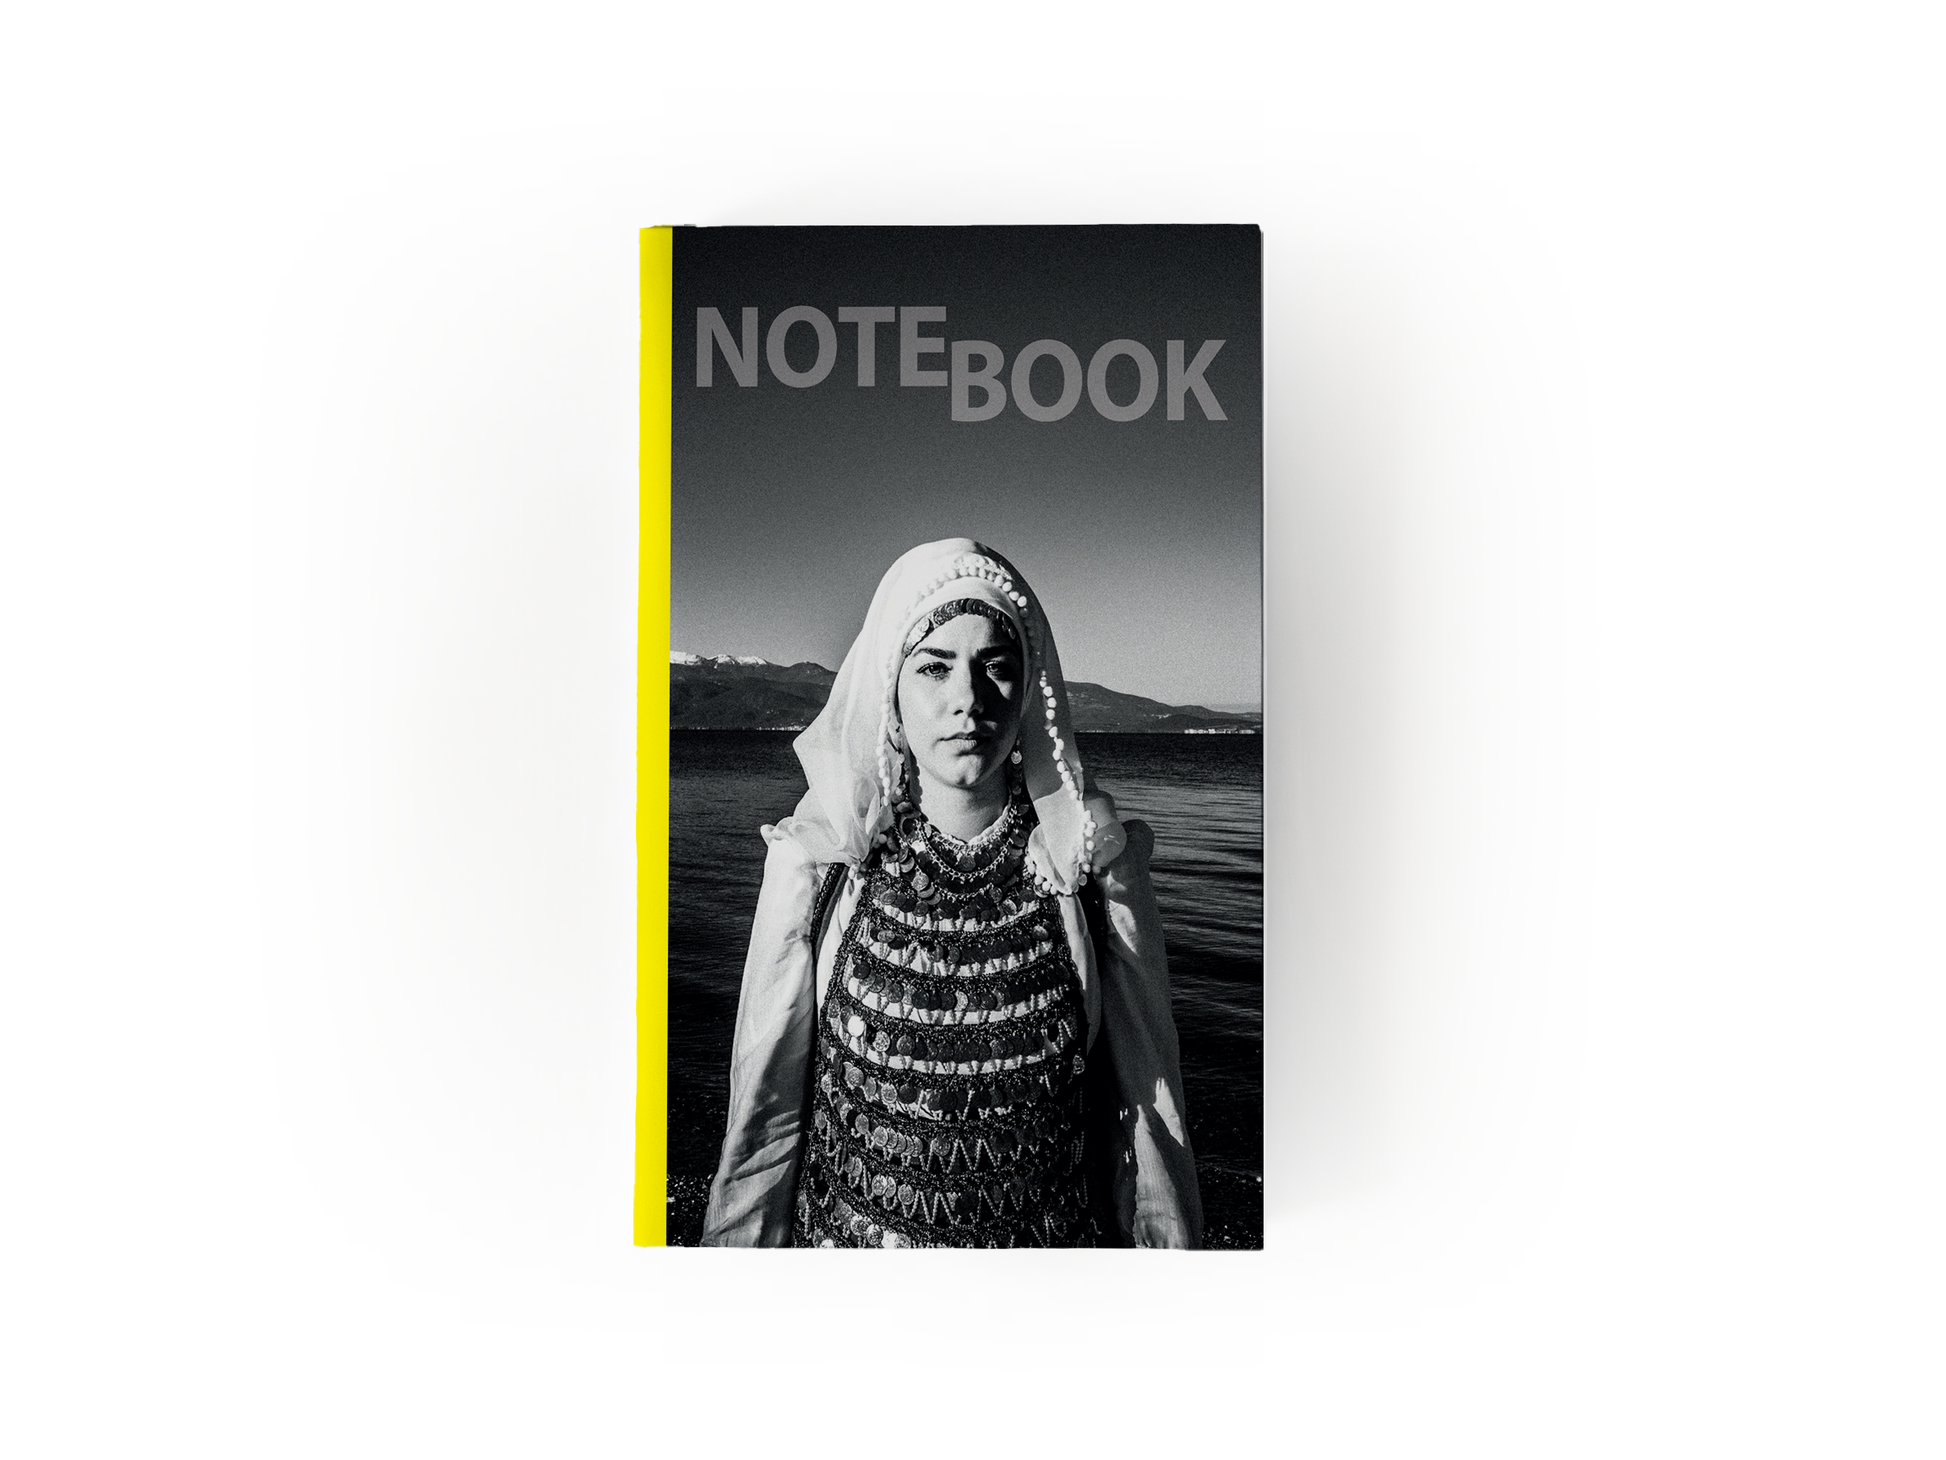 Black and White Notebooks & Notepads By George Tatakis | Greece | George Tatakis’ Journal Notebook - 120 page